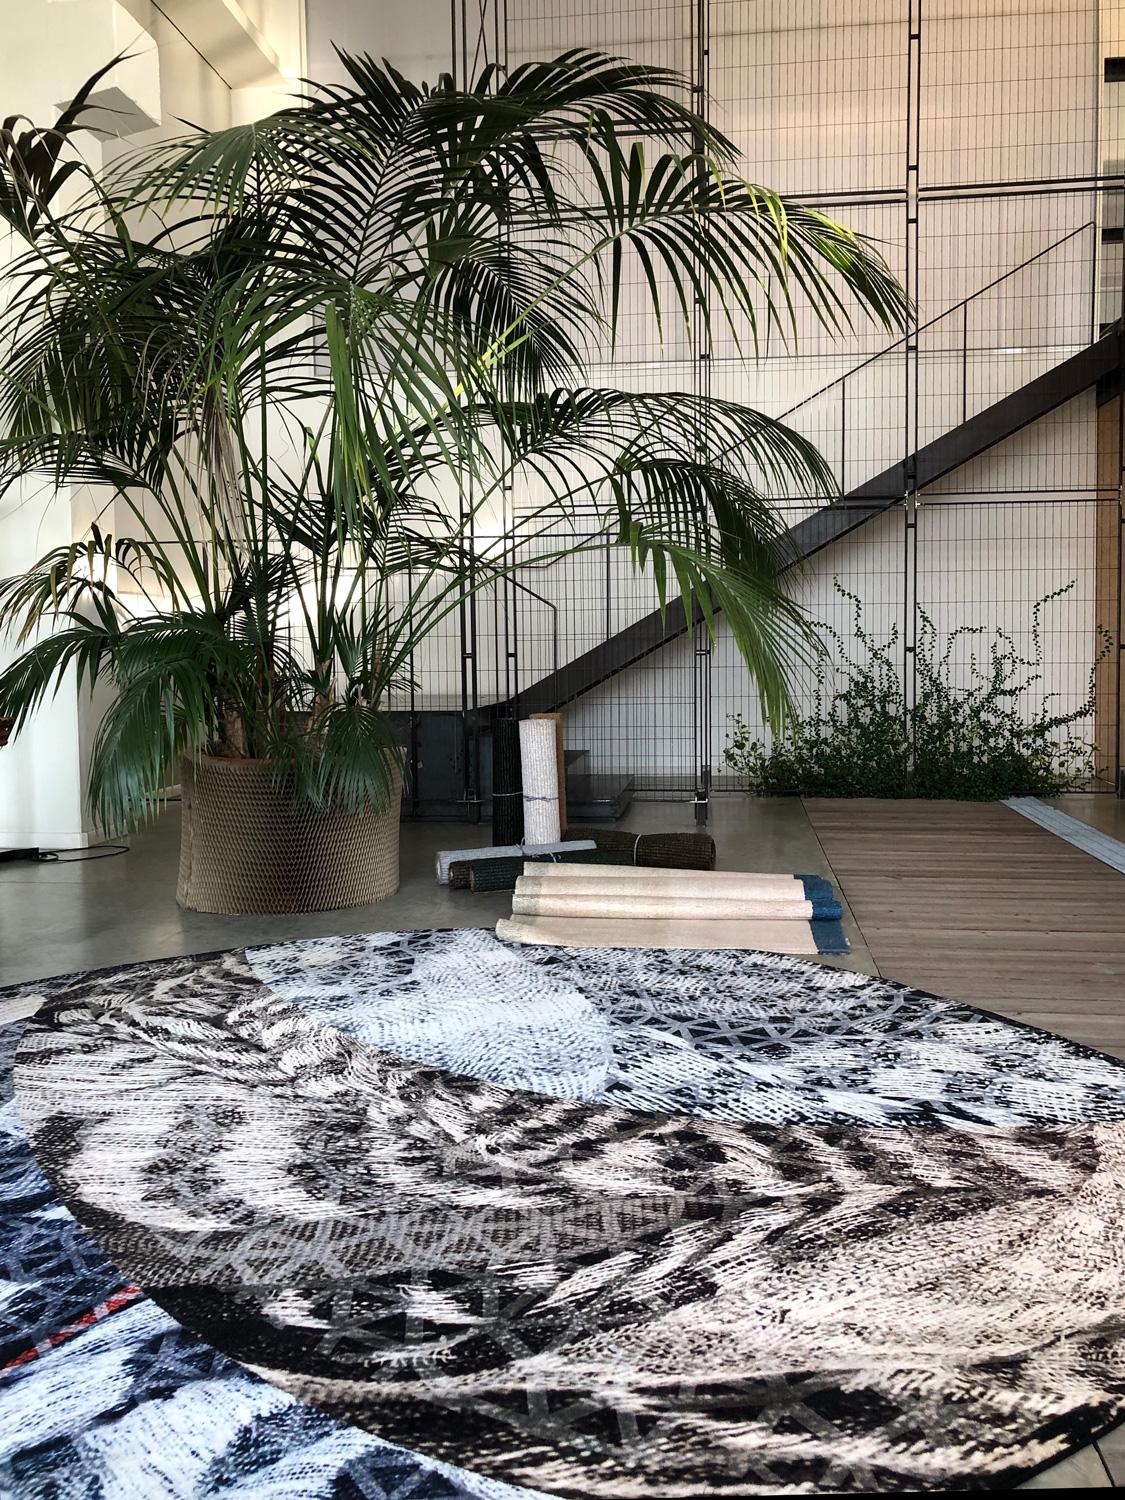 Next One of a Kind Rug by Deanna Comellini for G.T.DESIGN has an evocative design that combines the power of geometrical shapes with archaic and primordial patterns. The color palette ranges from earthy tones to deep blue and white hues, with